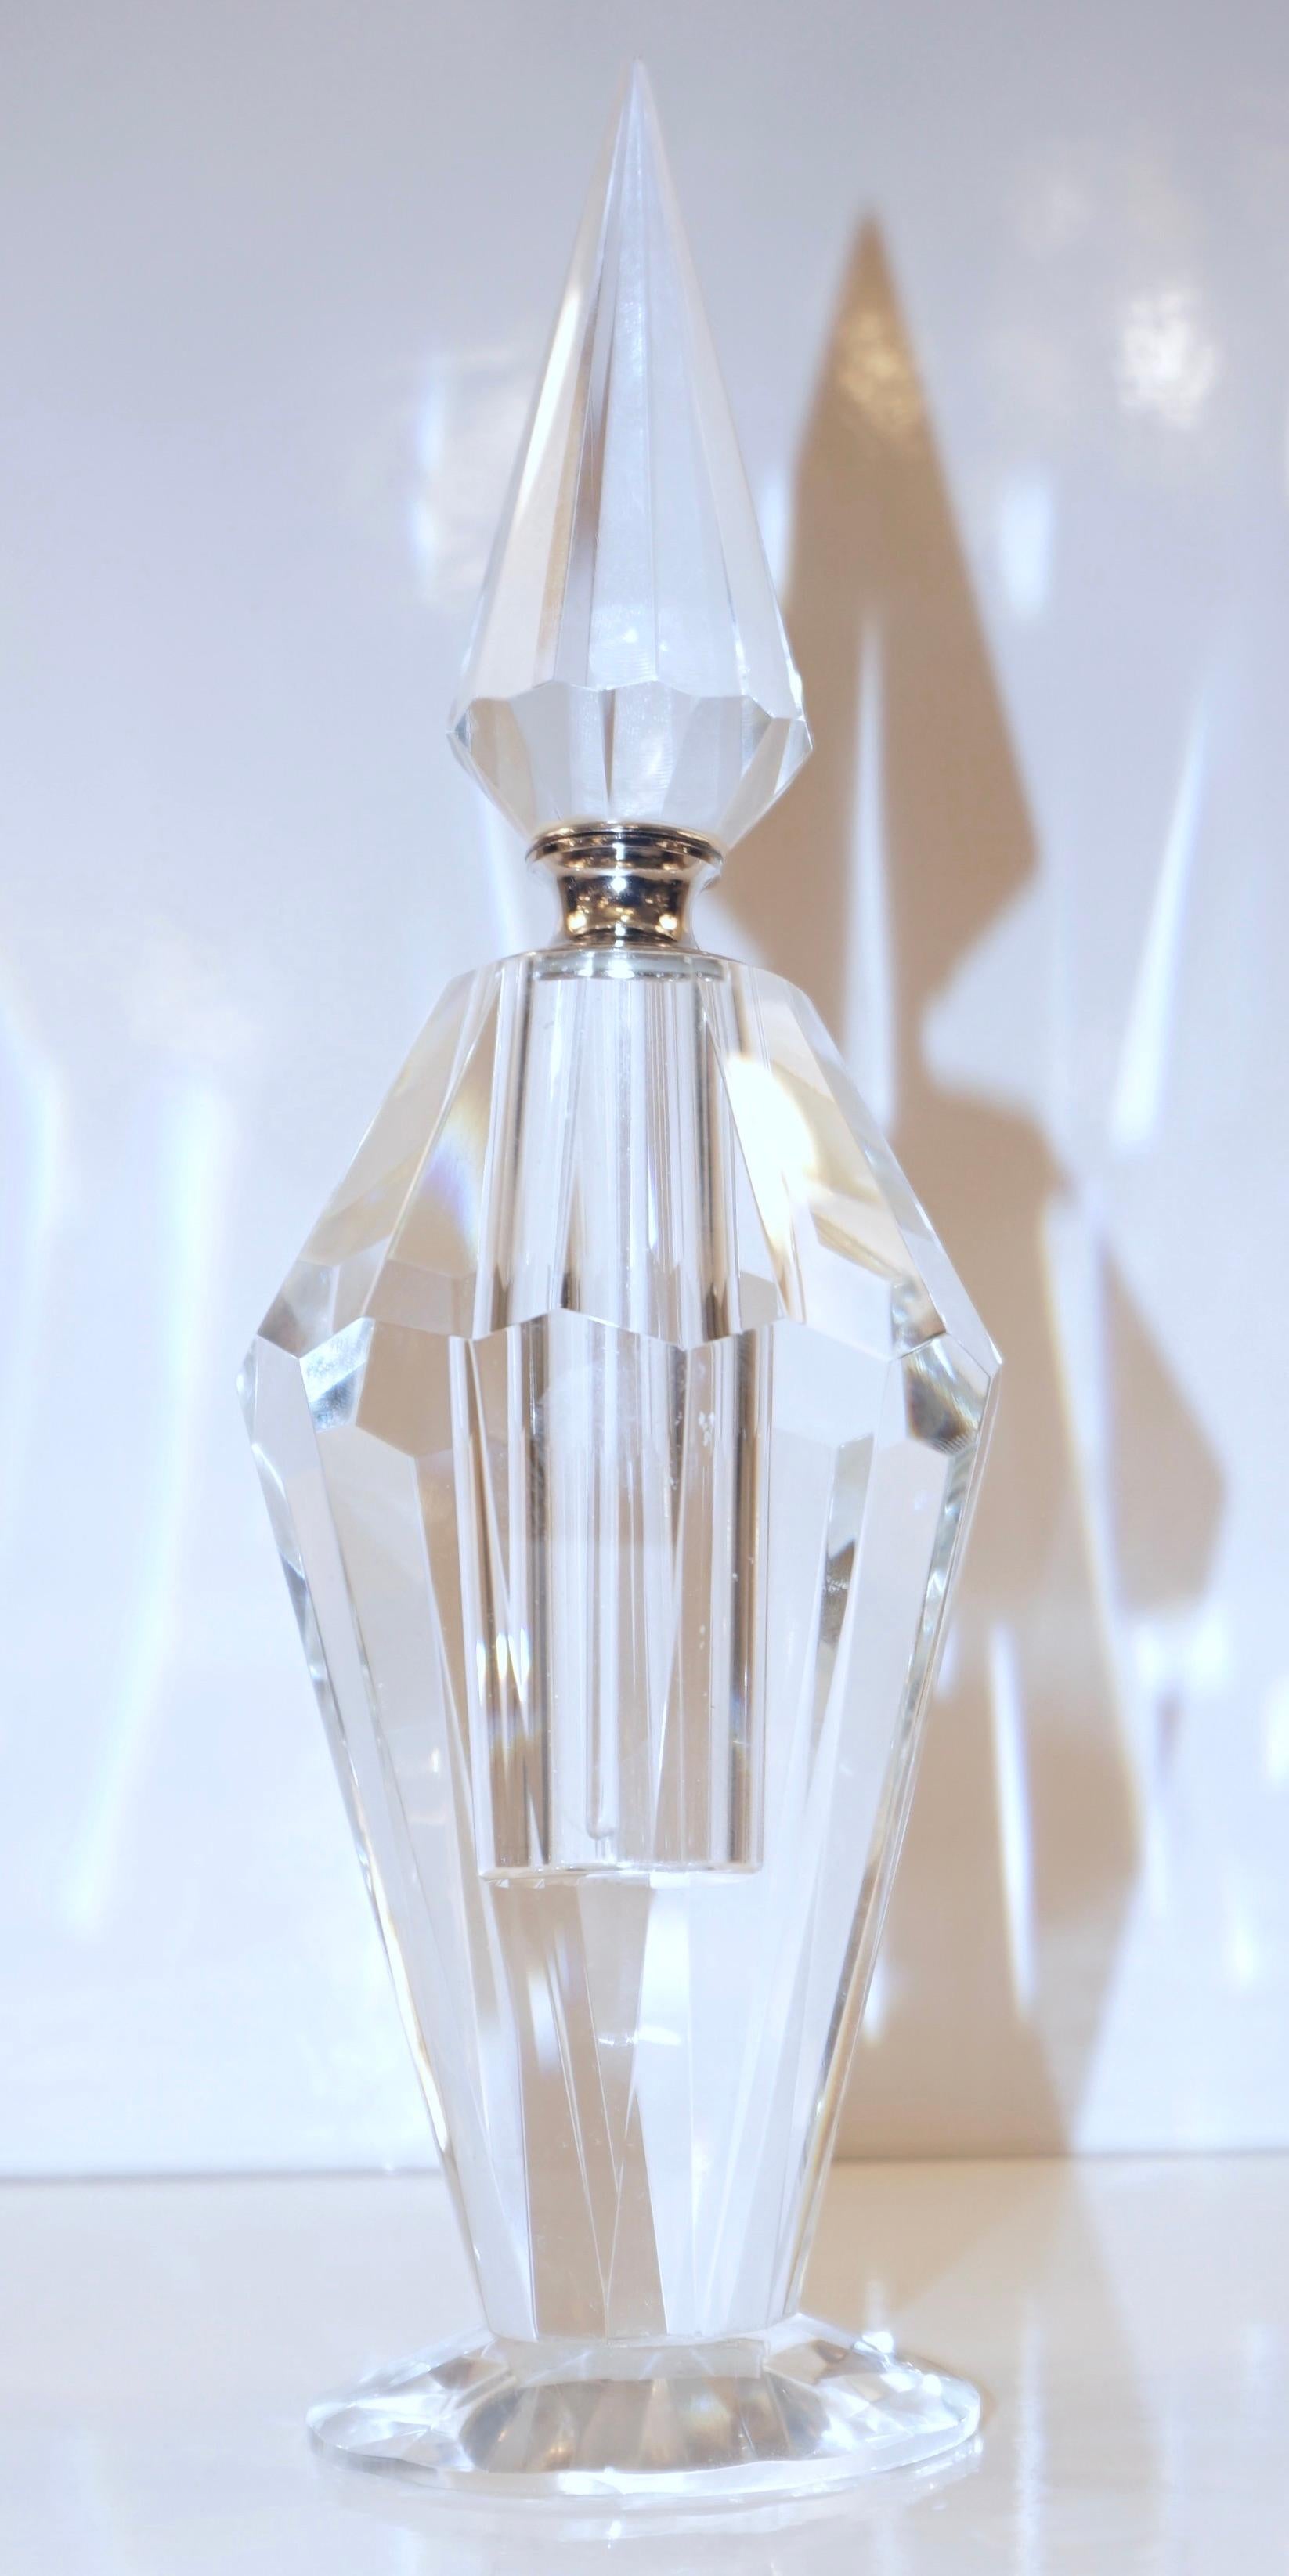 This elegant and sophisticated perfume bottle, a high-quality crystal product with Art Deco flair, and Hollywood Regency glamour, with a prismatic geometric pyramid shape, resembles a diamond for its multiple faceted cuts in the body, the base, and